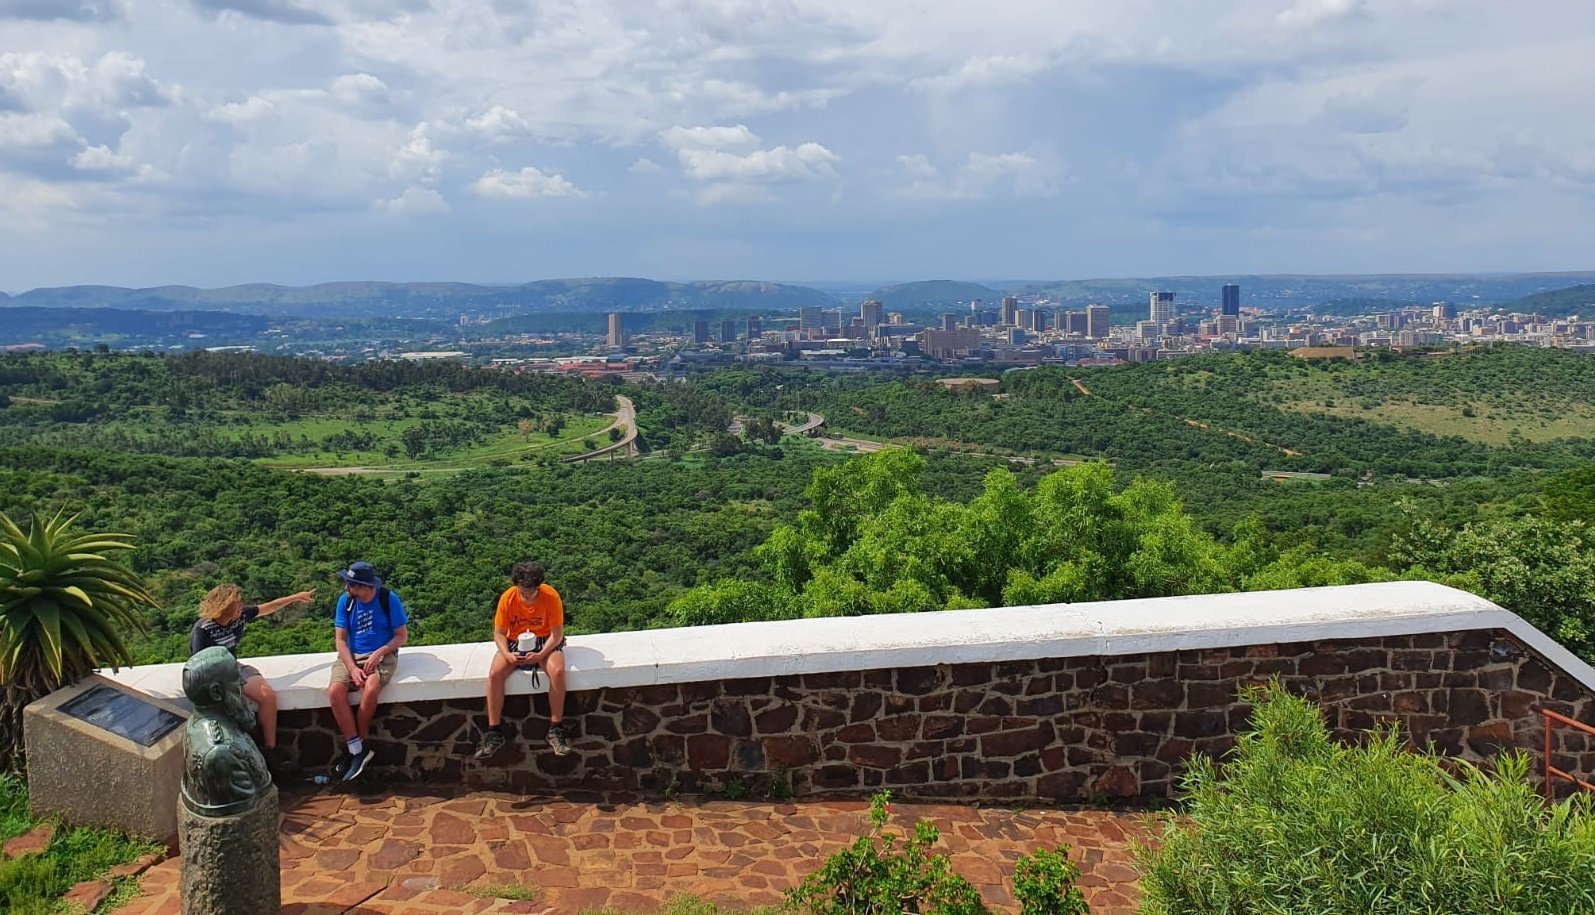 Pretoria views from Schanskop Fort on a hike at the Voortrekker Monument. Photo: Supplied.